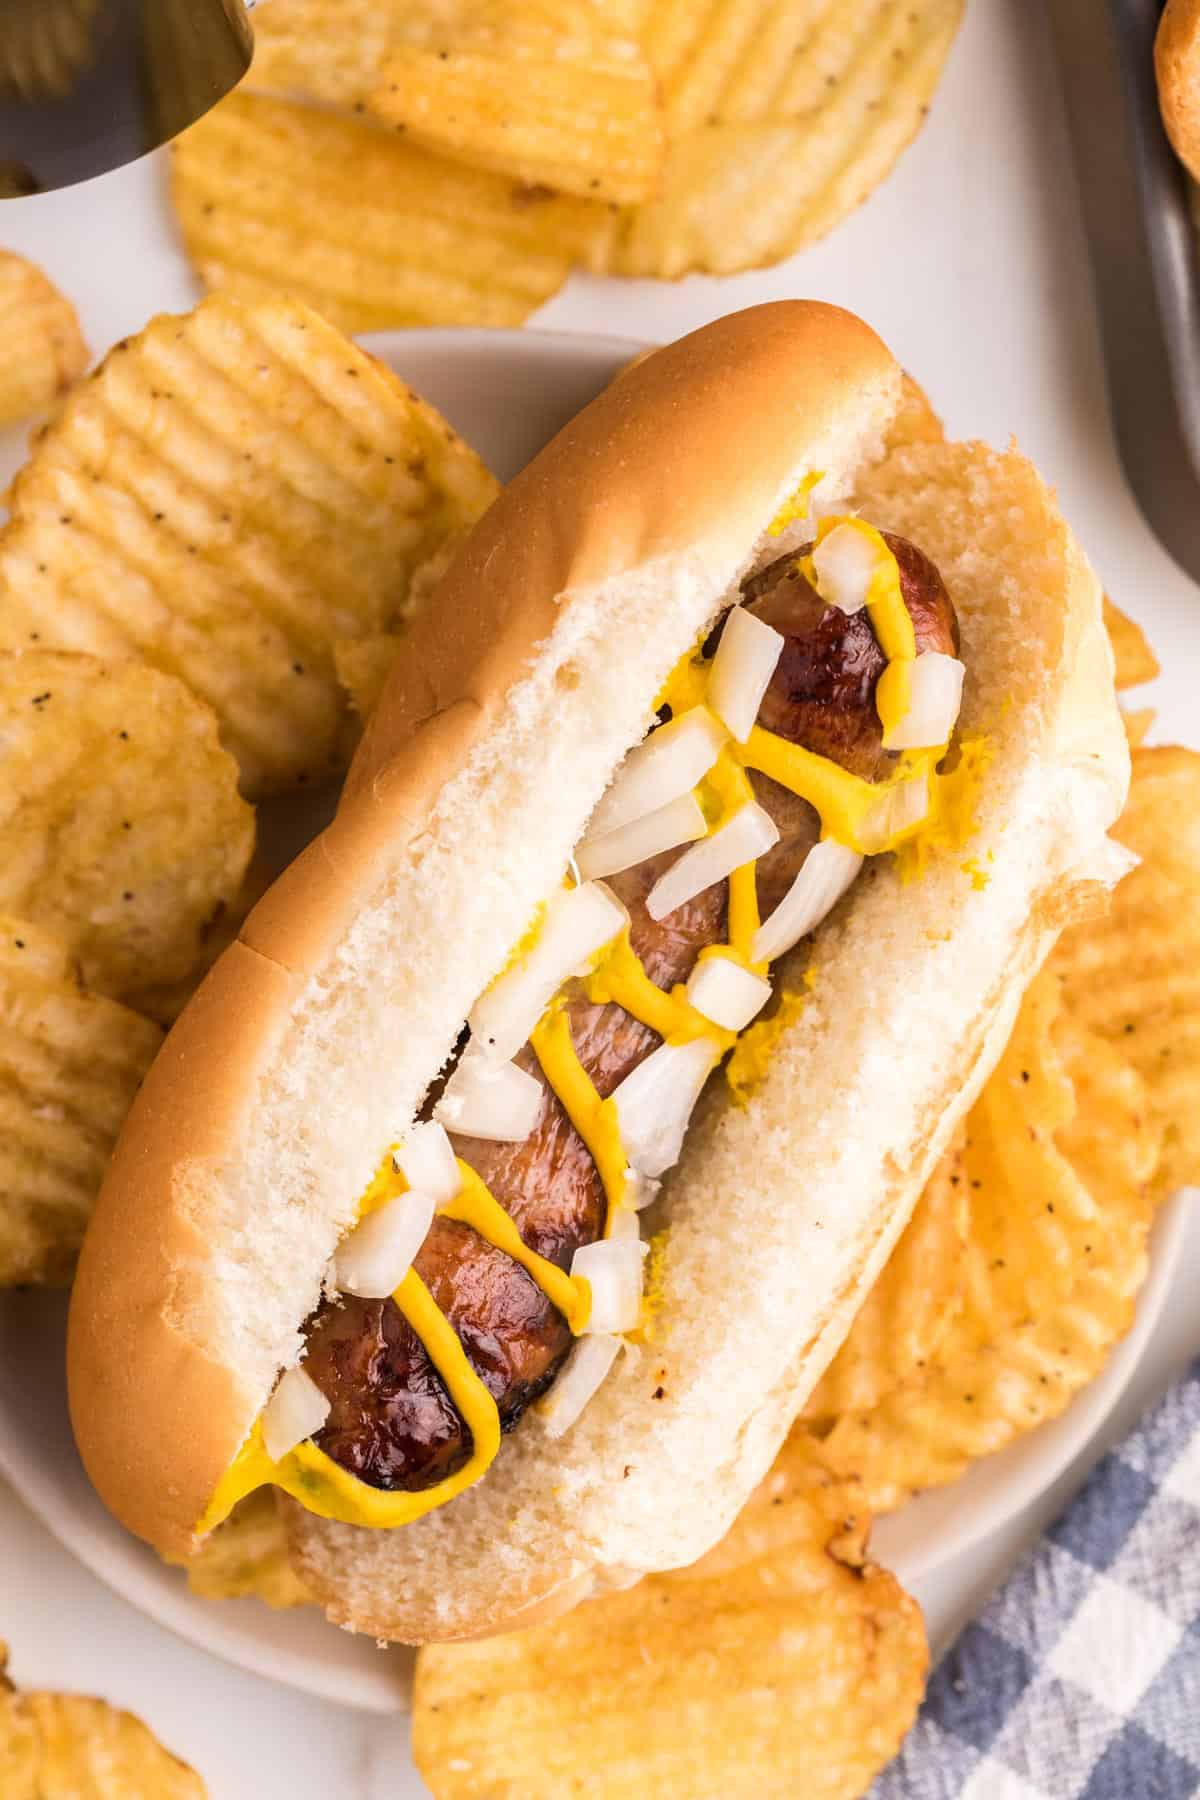 A brat in a roll with onion and mustard.